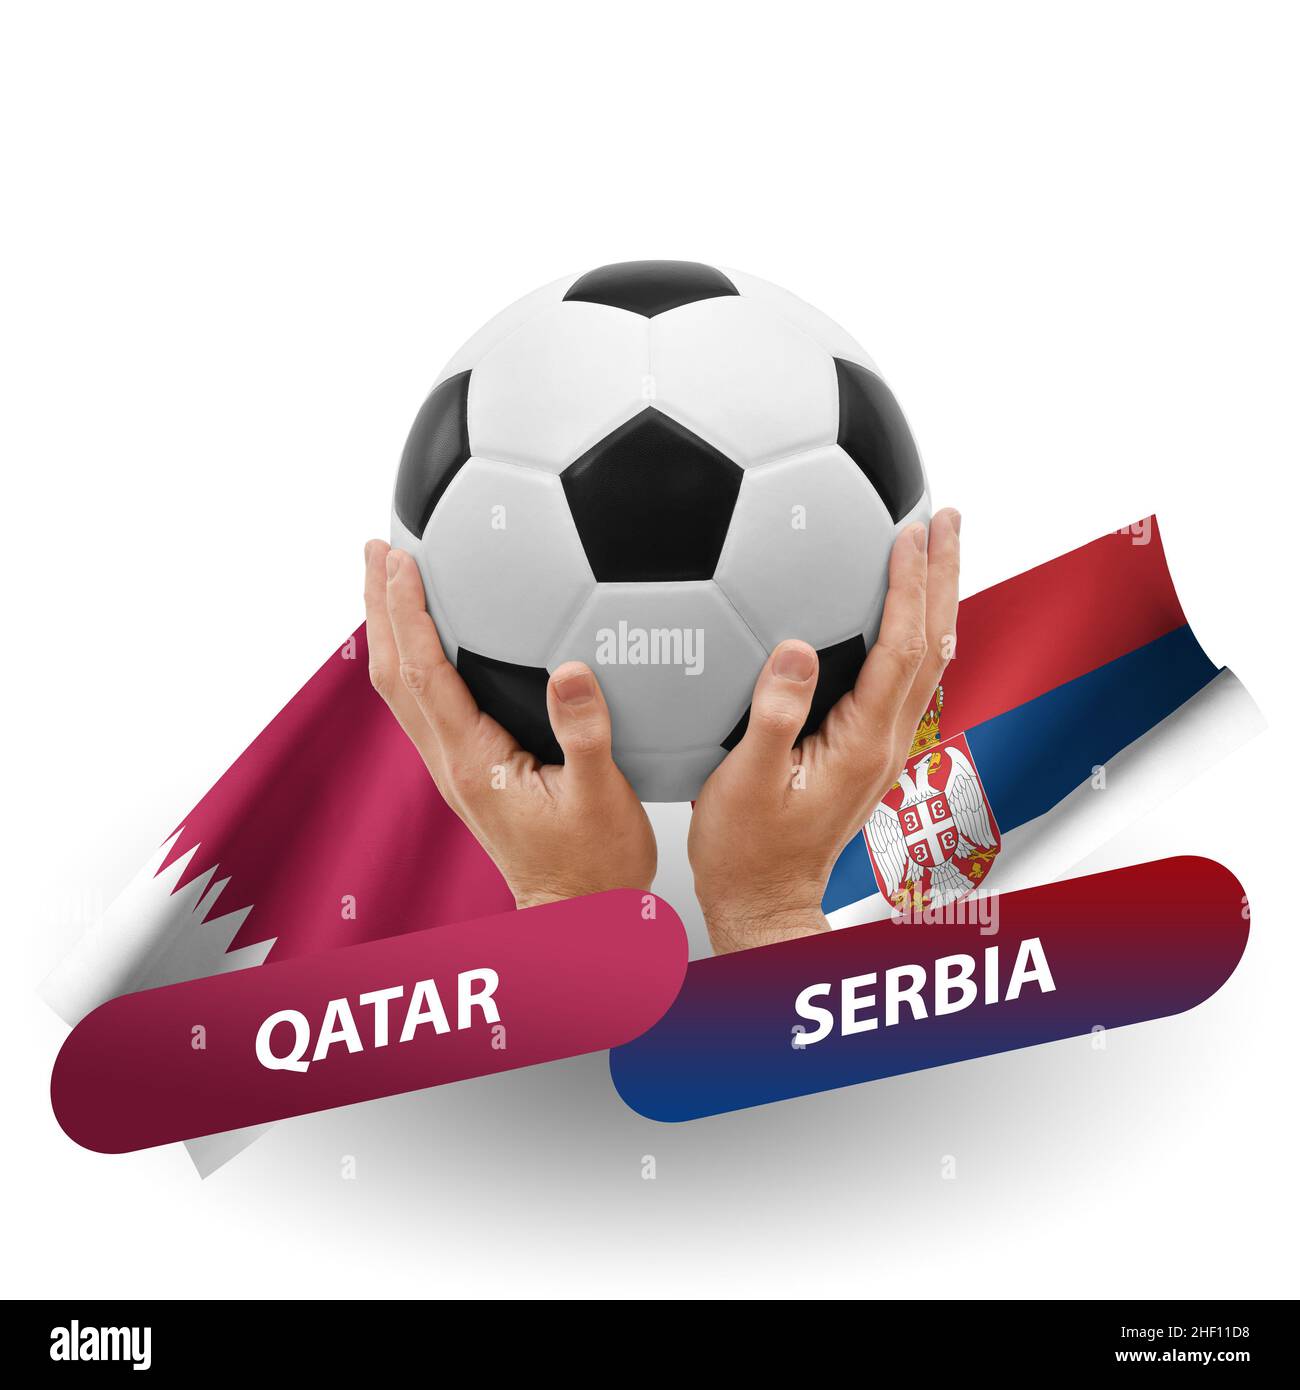 Soccer football competition match, national teams qatar vs serbia Stock Photo